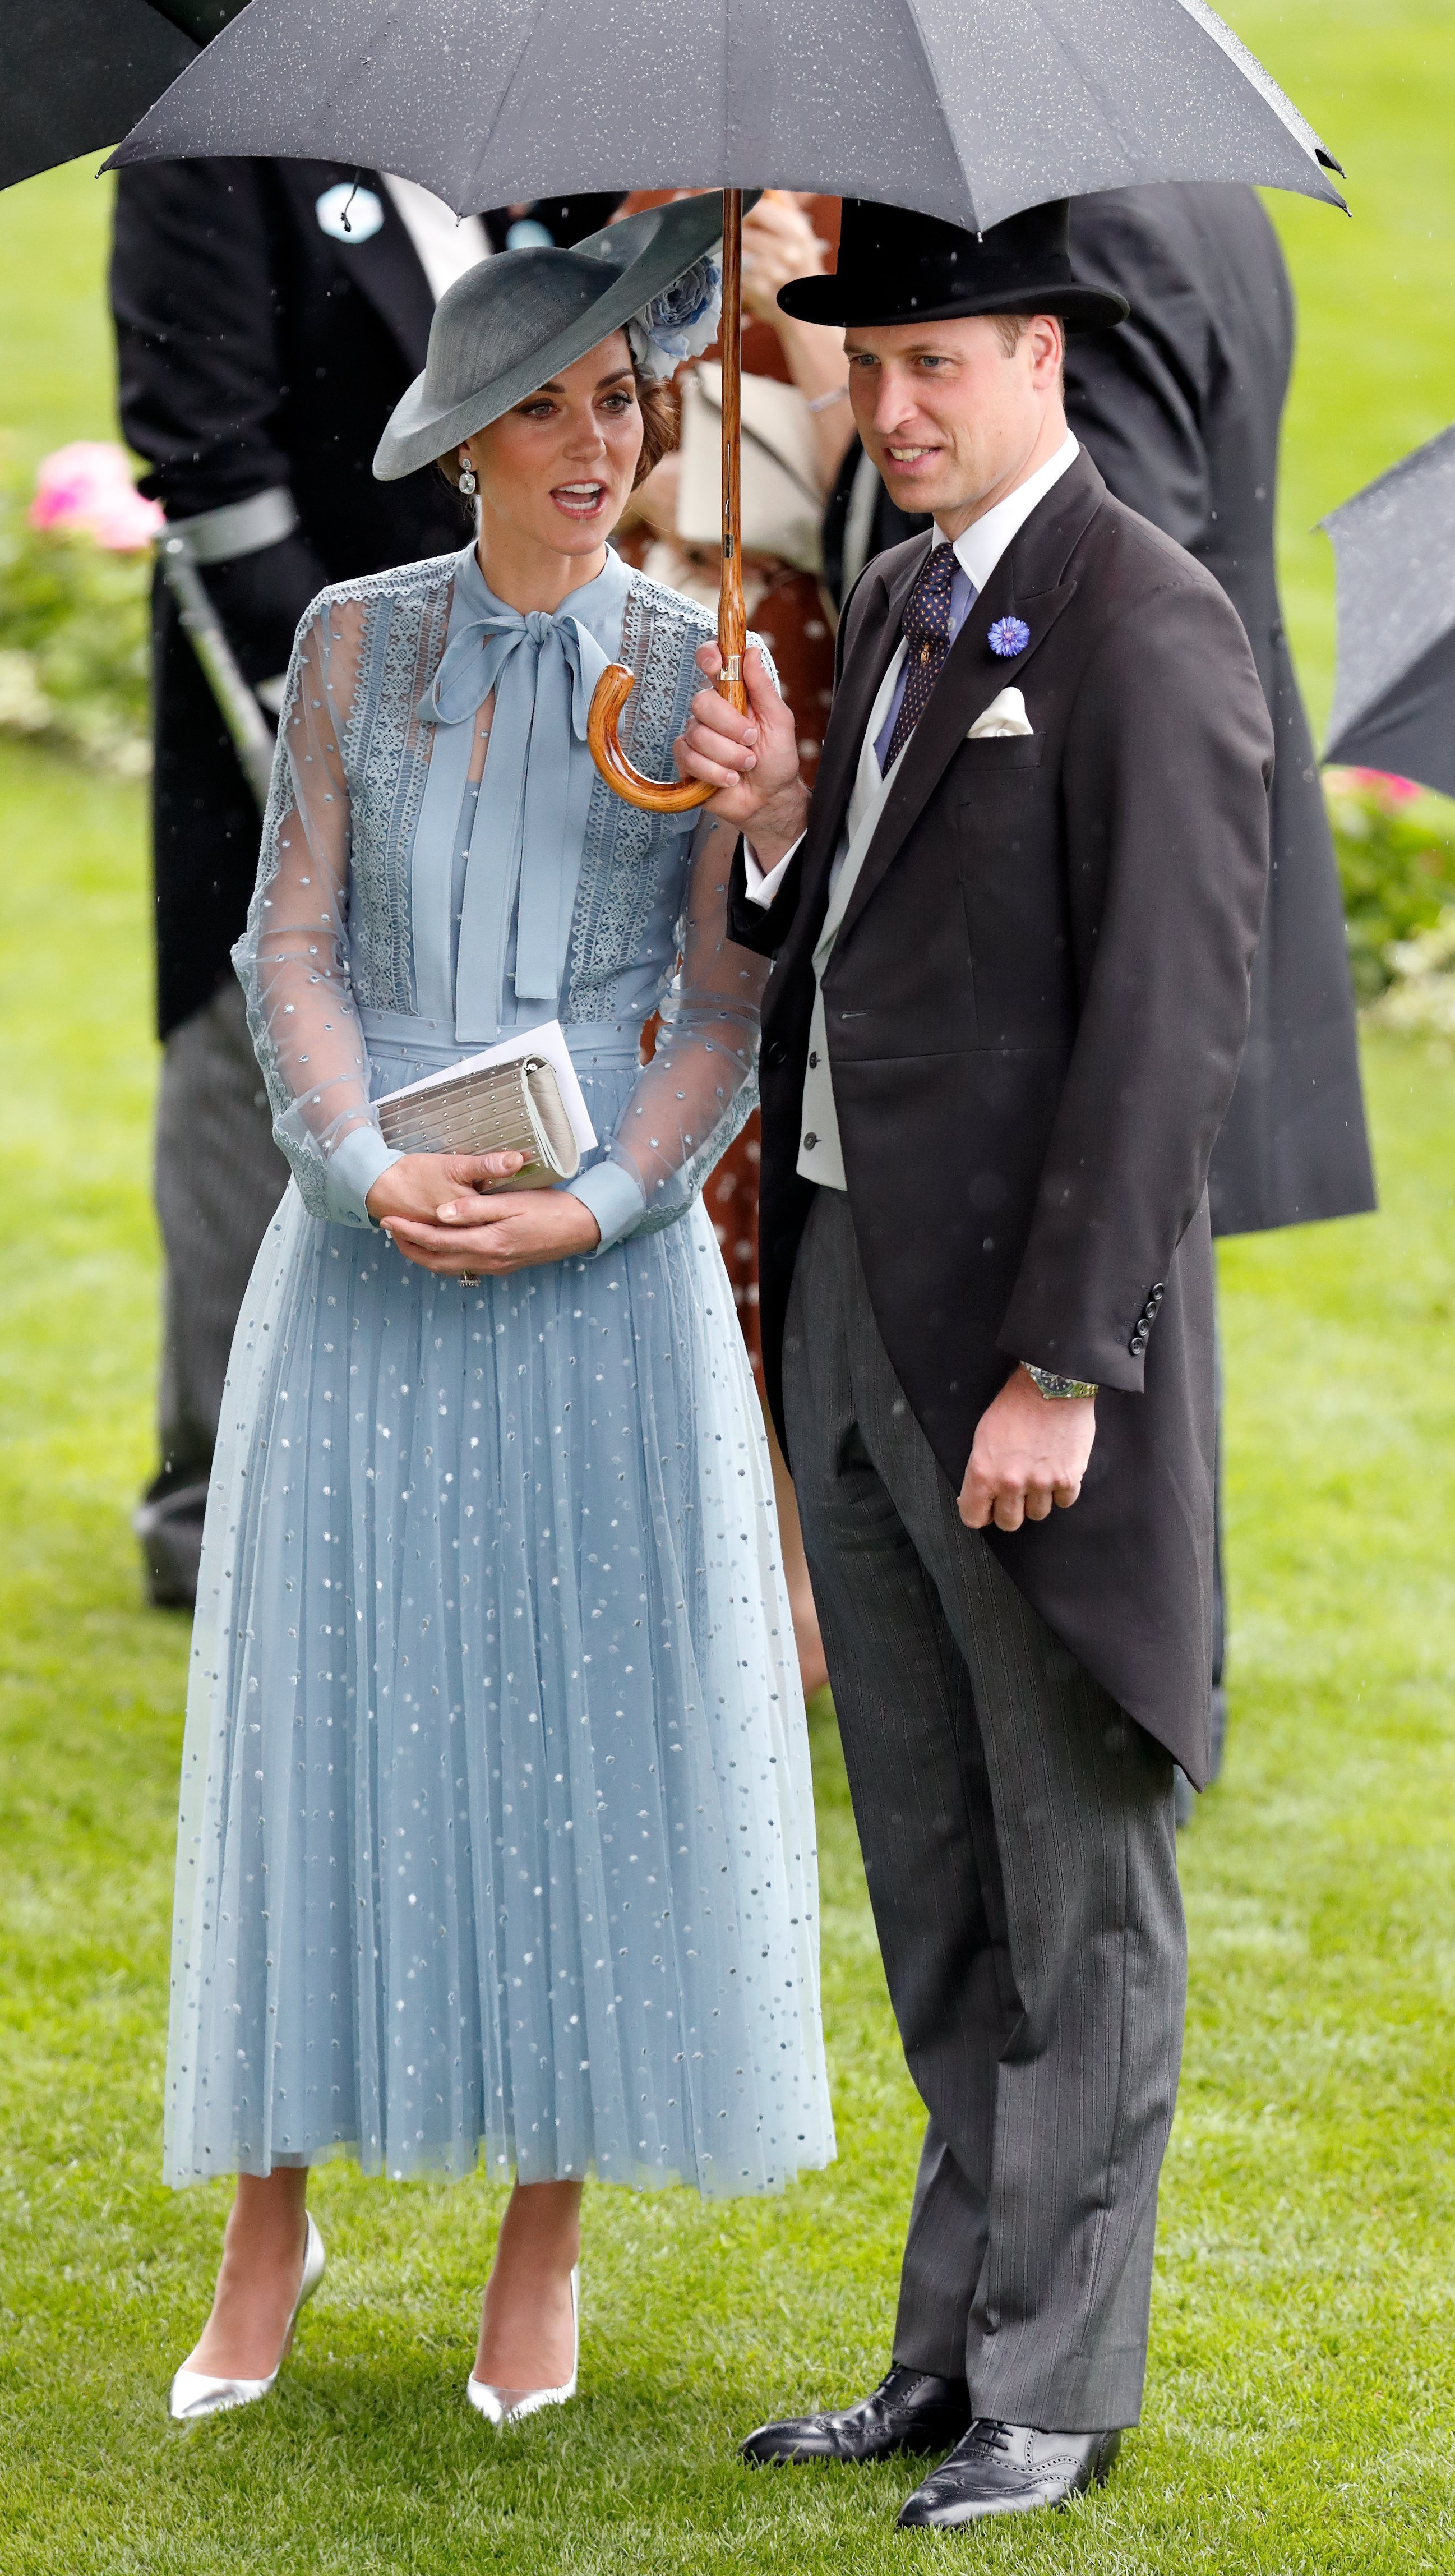 Prince William and Duchess Kate at the Royal Ascot in June 2019 | Photo: Getty Images